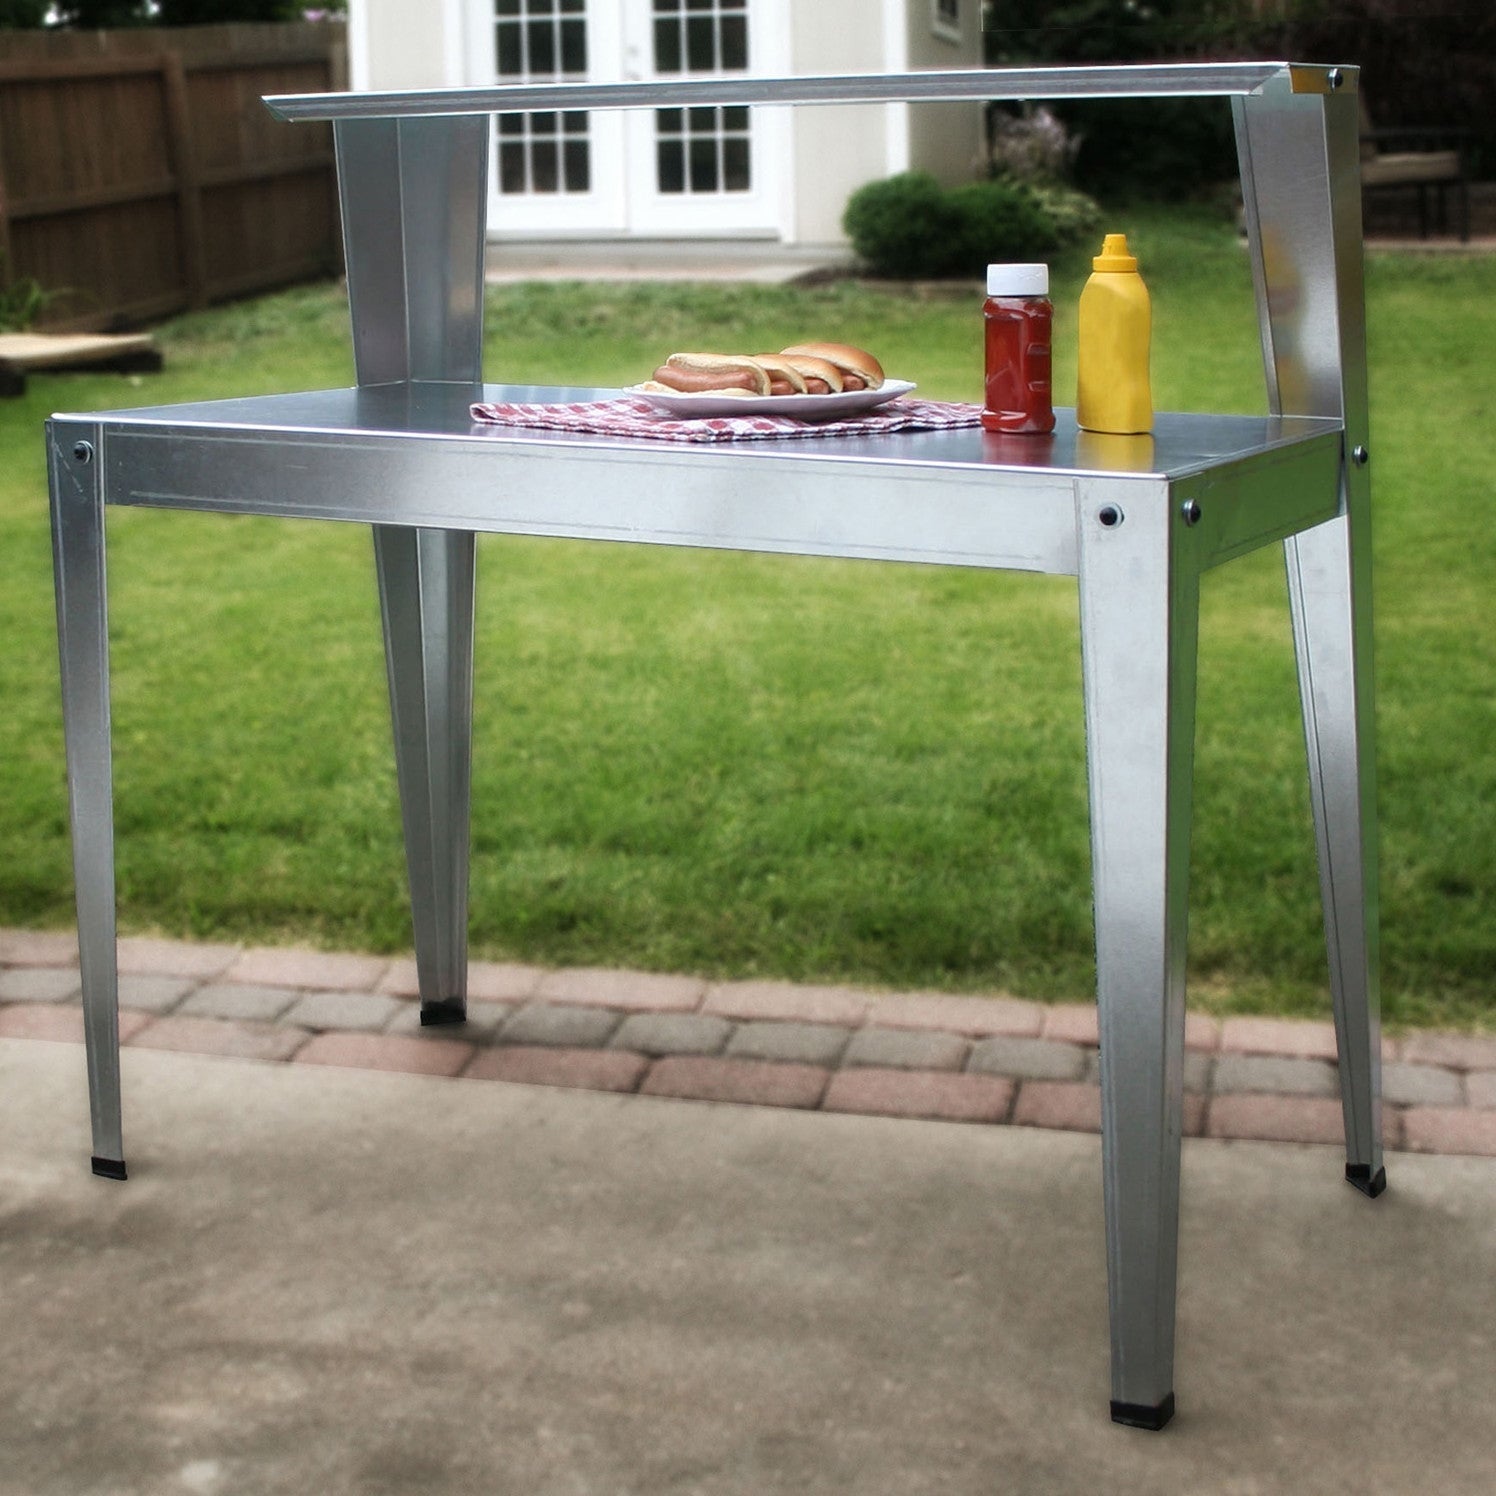 Kitchen > Utility Tables & Workbenches - 24 X 44 Inch Galvanized Steel Top Utility Table Workbench Potting Bench